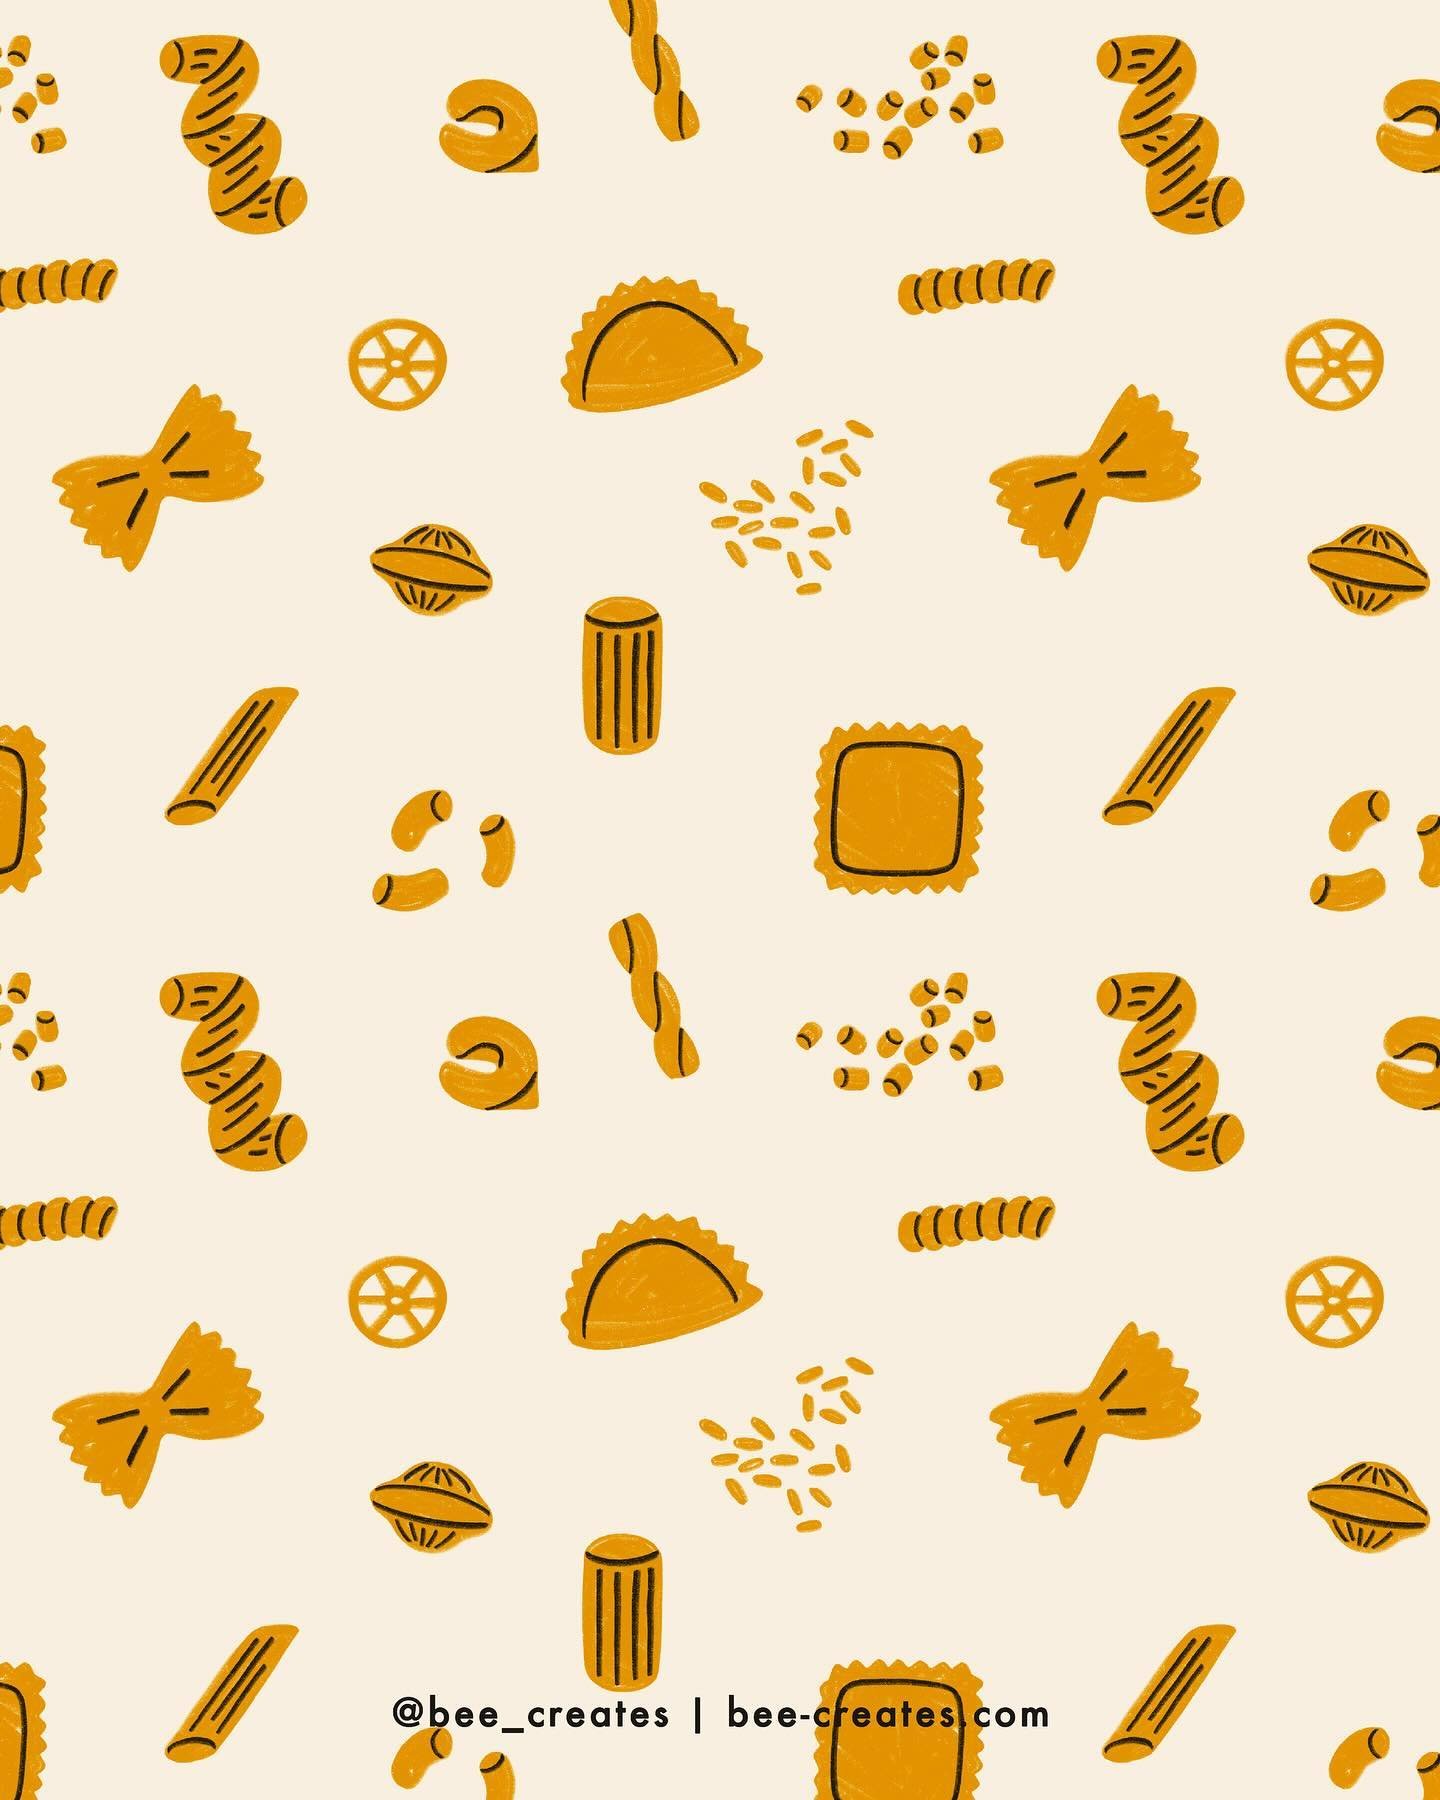 Using this pasta to announce that I am launching merch with the pasta queen herself @buonapastaclub Final slide is a sneak peek 👀 Stay tuned for more details! I&rsquo;m so so so excited ♡ 

PASTA 10/100 for #100daysoftastyart

#pasta #noodles #itali